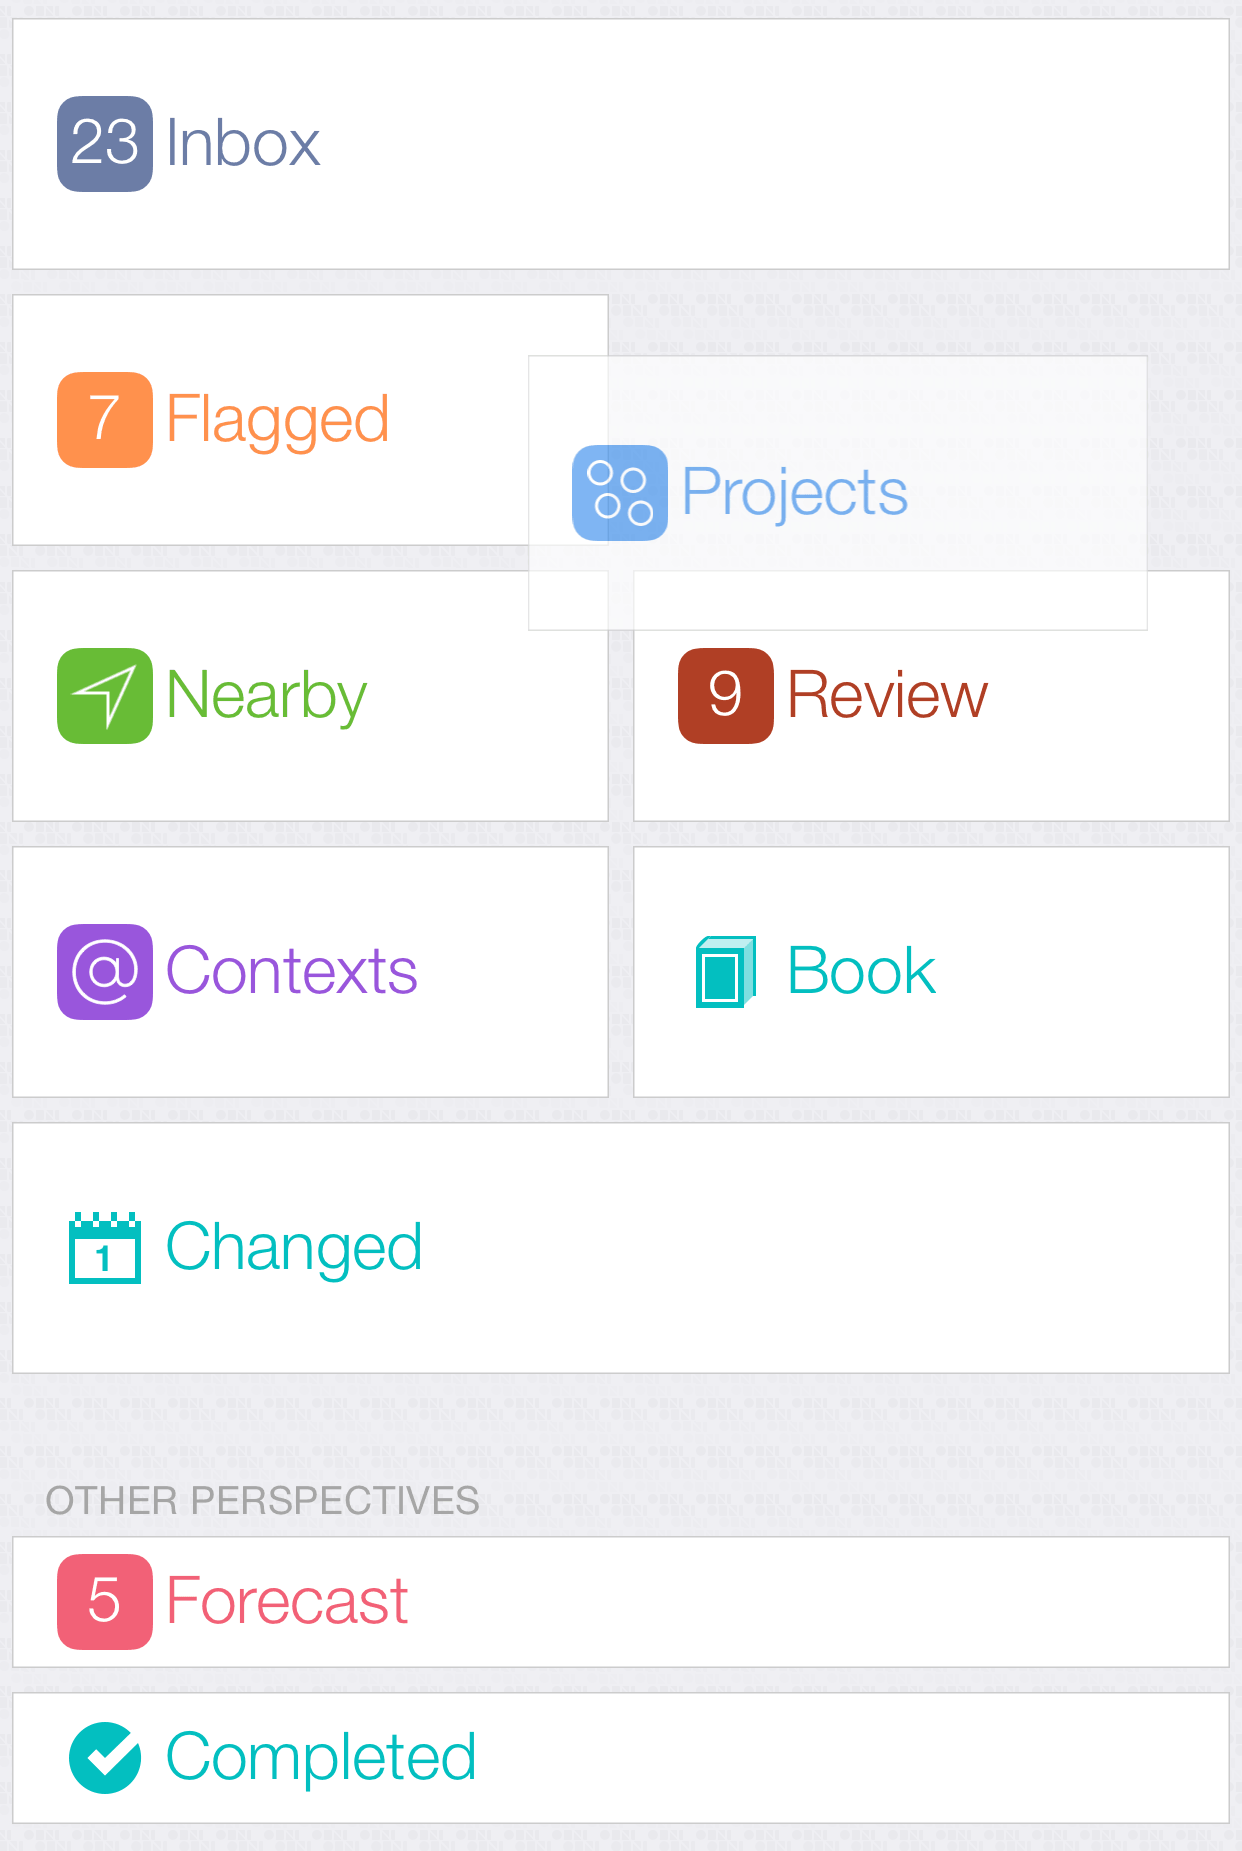 Reordering perspectives using the tile editor in OmniFocus 2 for iOS on iPhone 6 Plus.